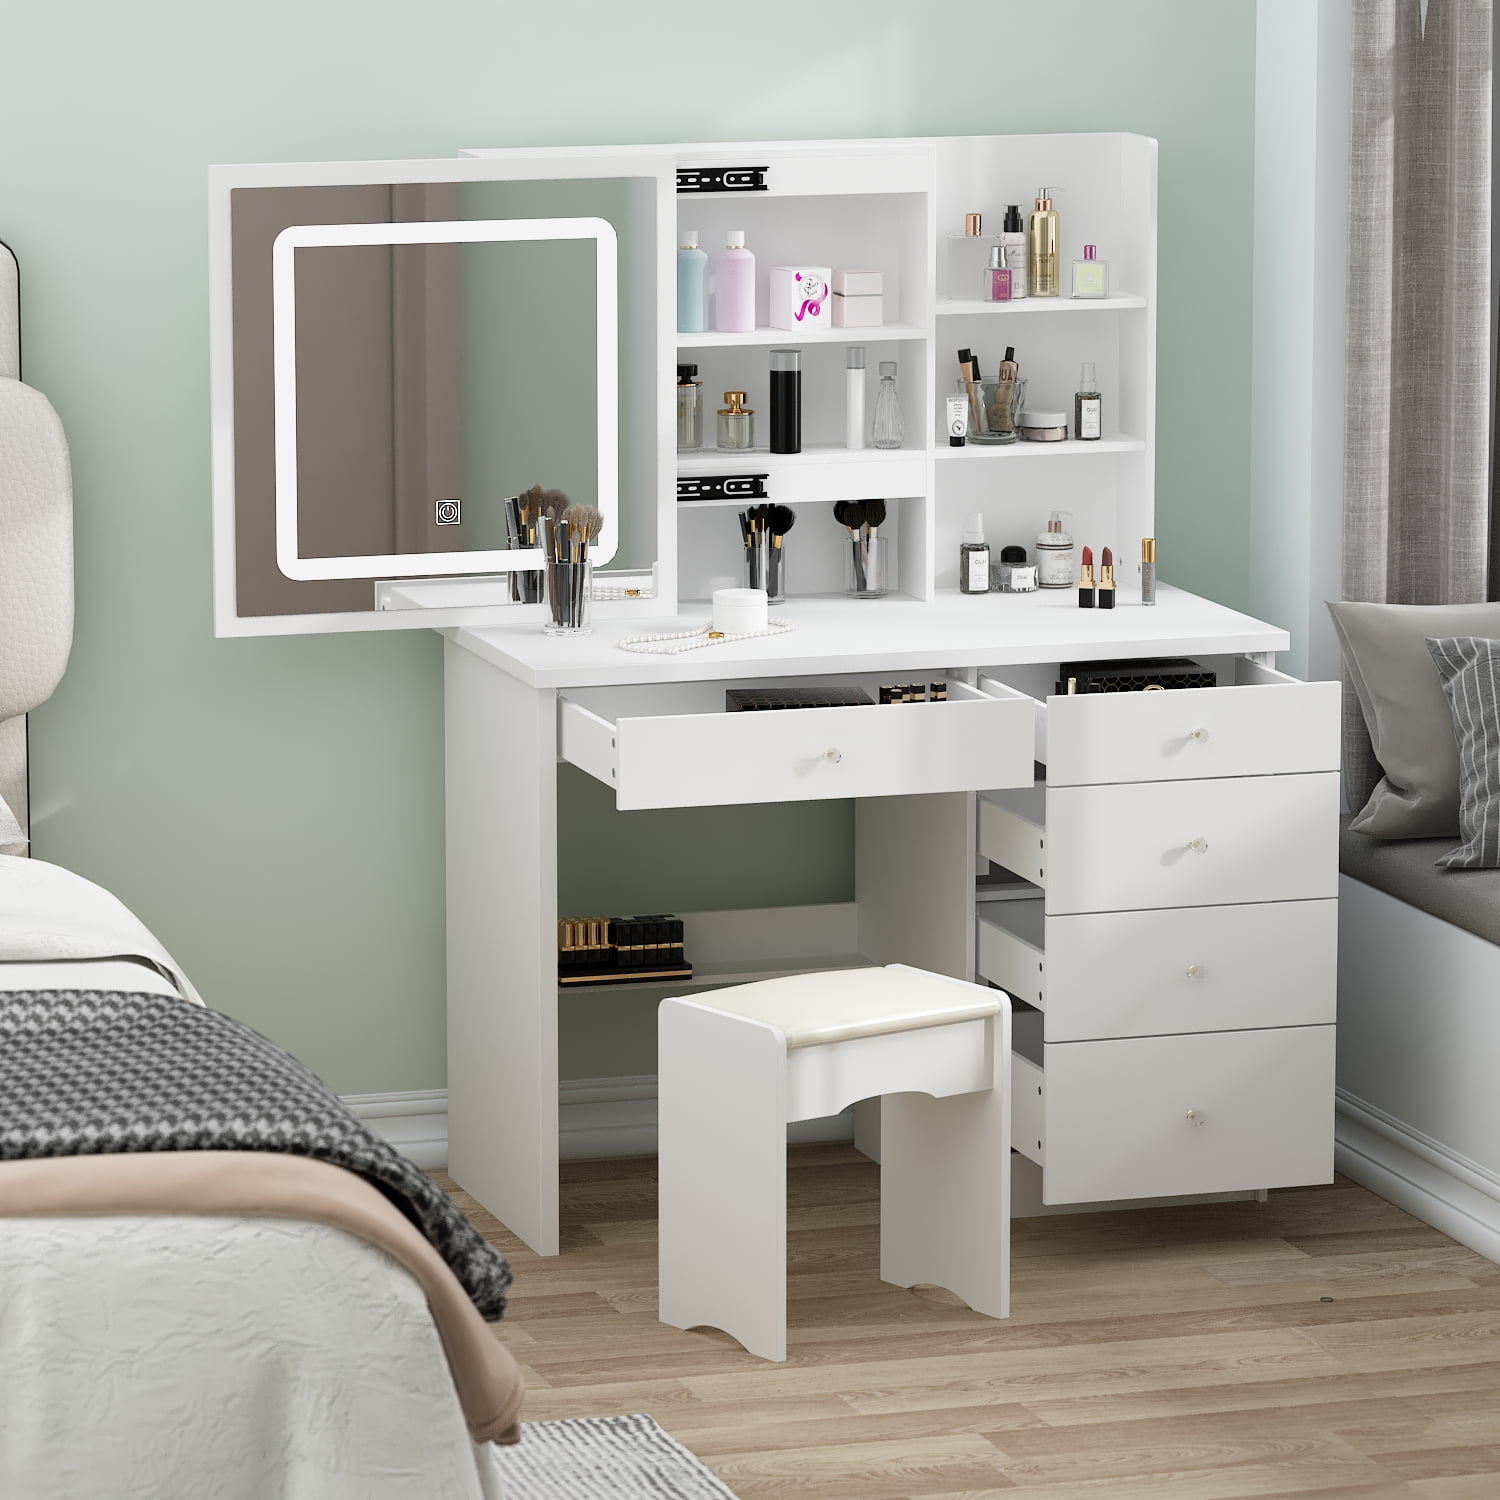 Hitow Makeup Vanity Table Set with Sliding Lighted Mirror, 5 Drawers and Storage  Shelves, Dressing Table Desk with Stool,White 